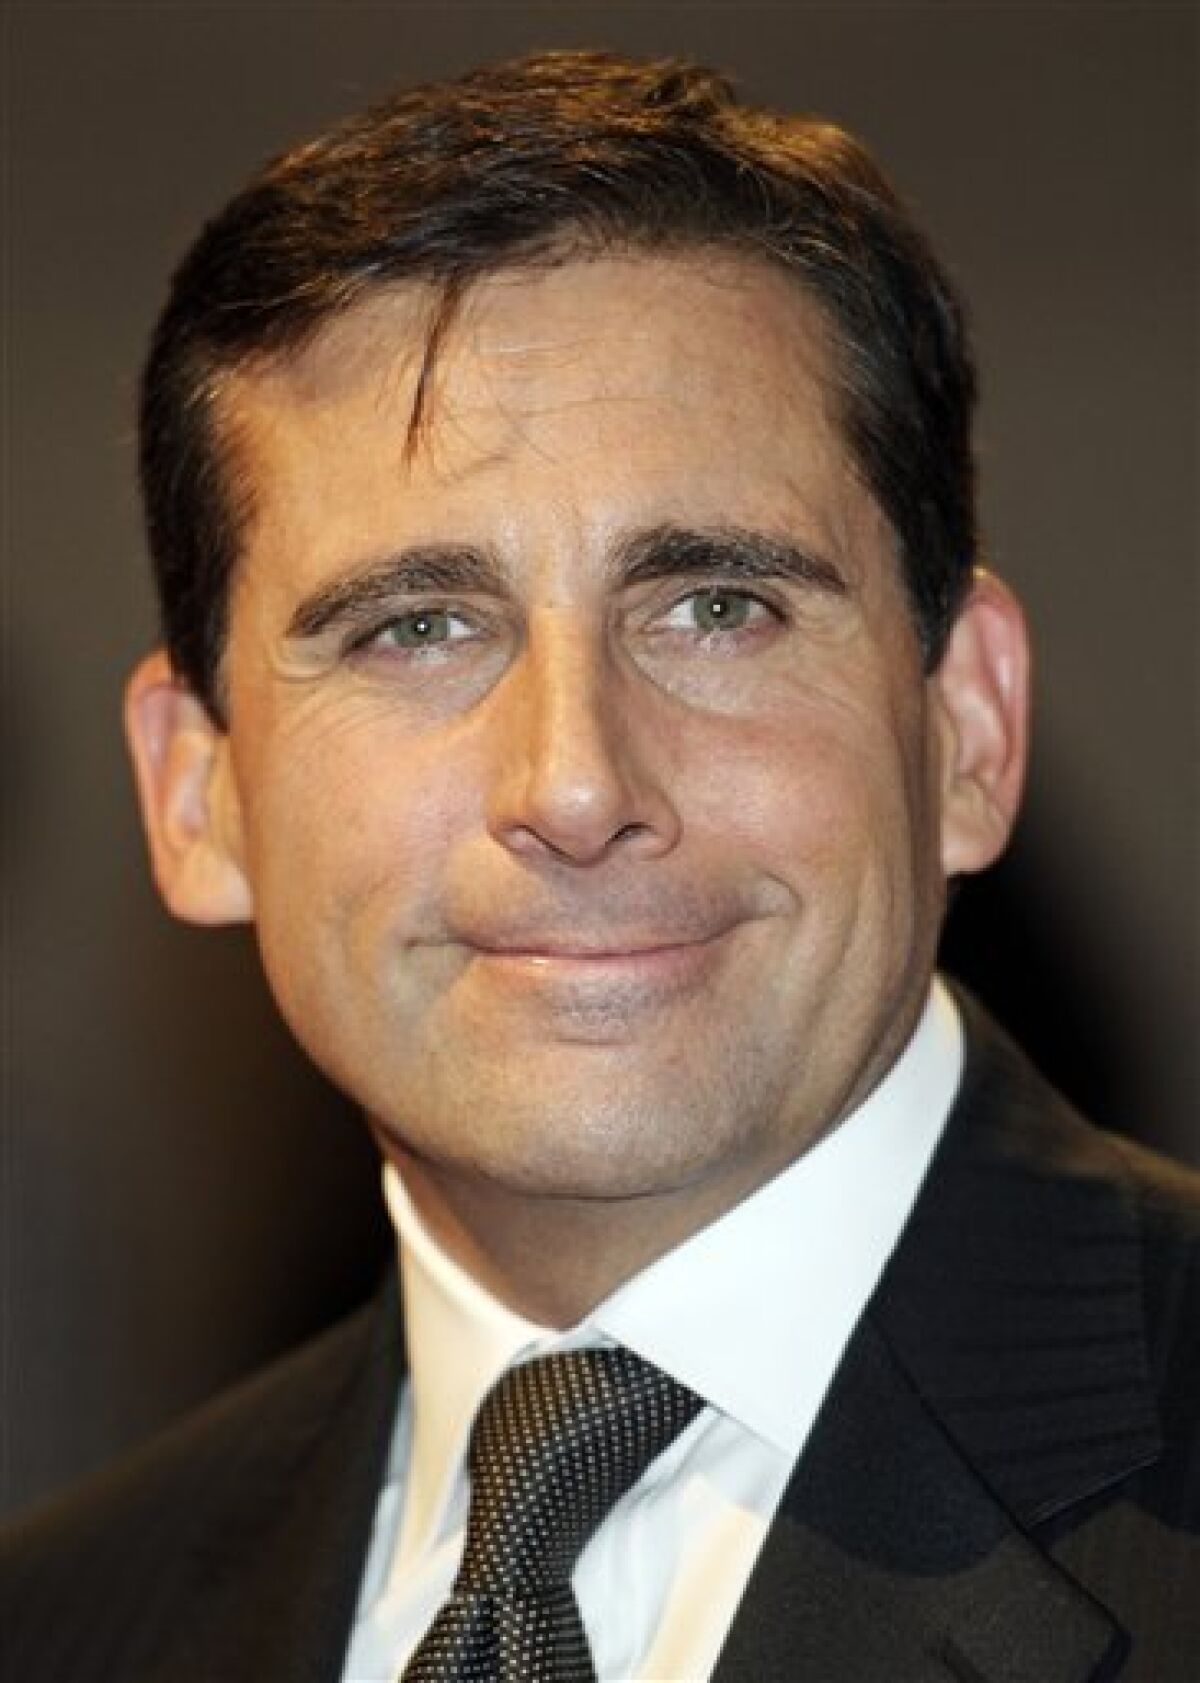 Steve Carell leaving 'The Office' early - The San Diego Union-Tribune